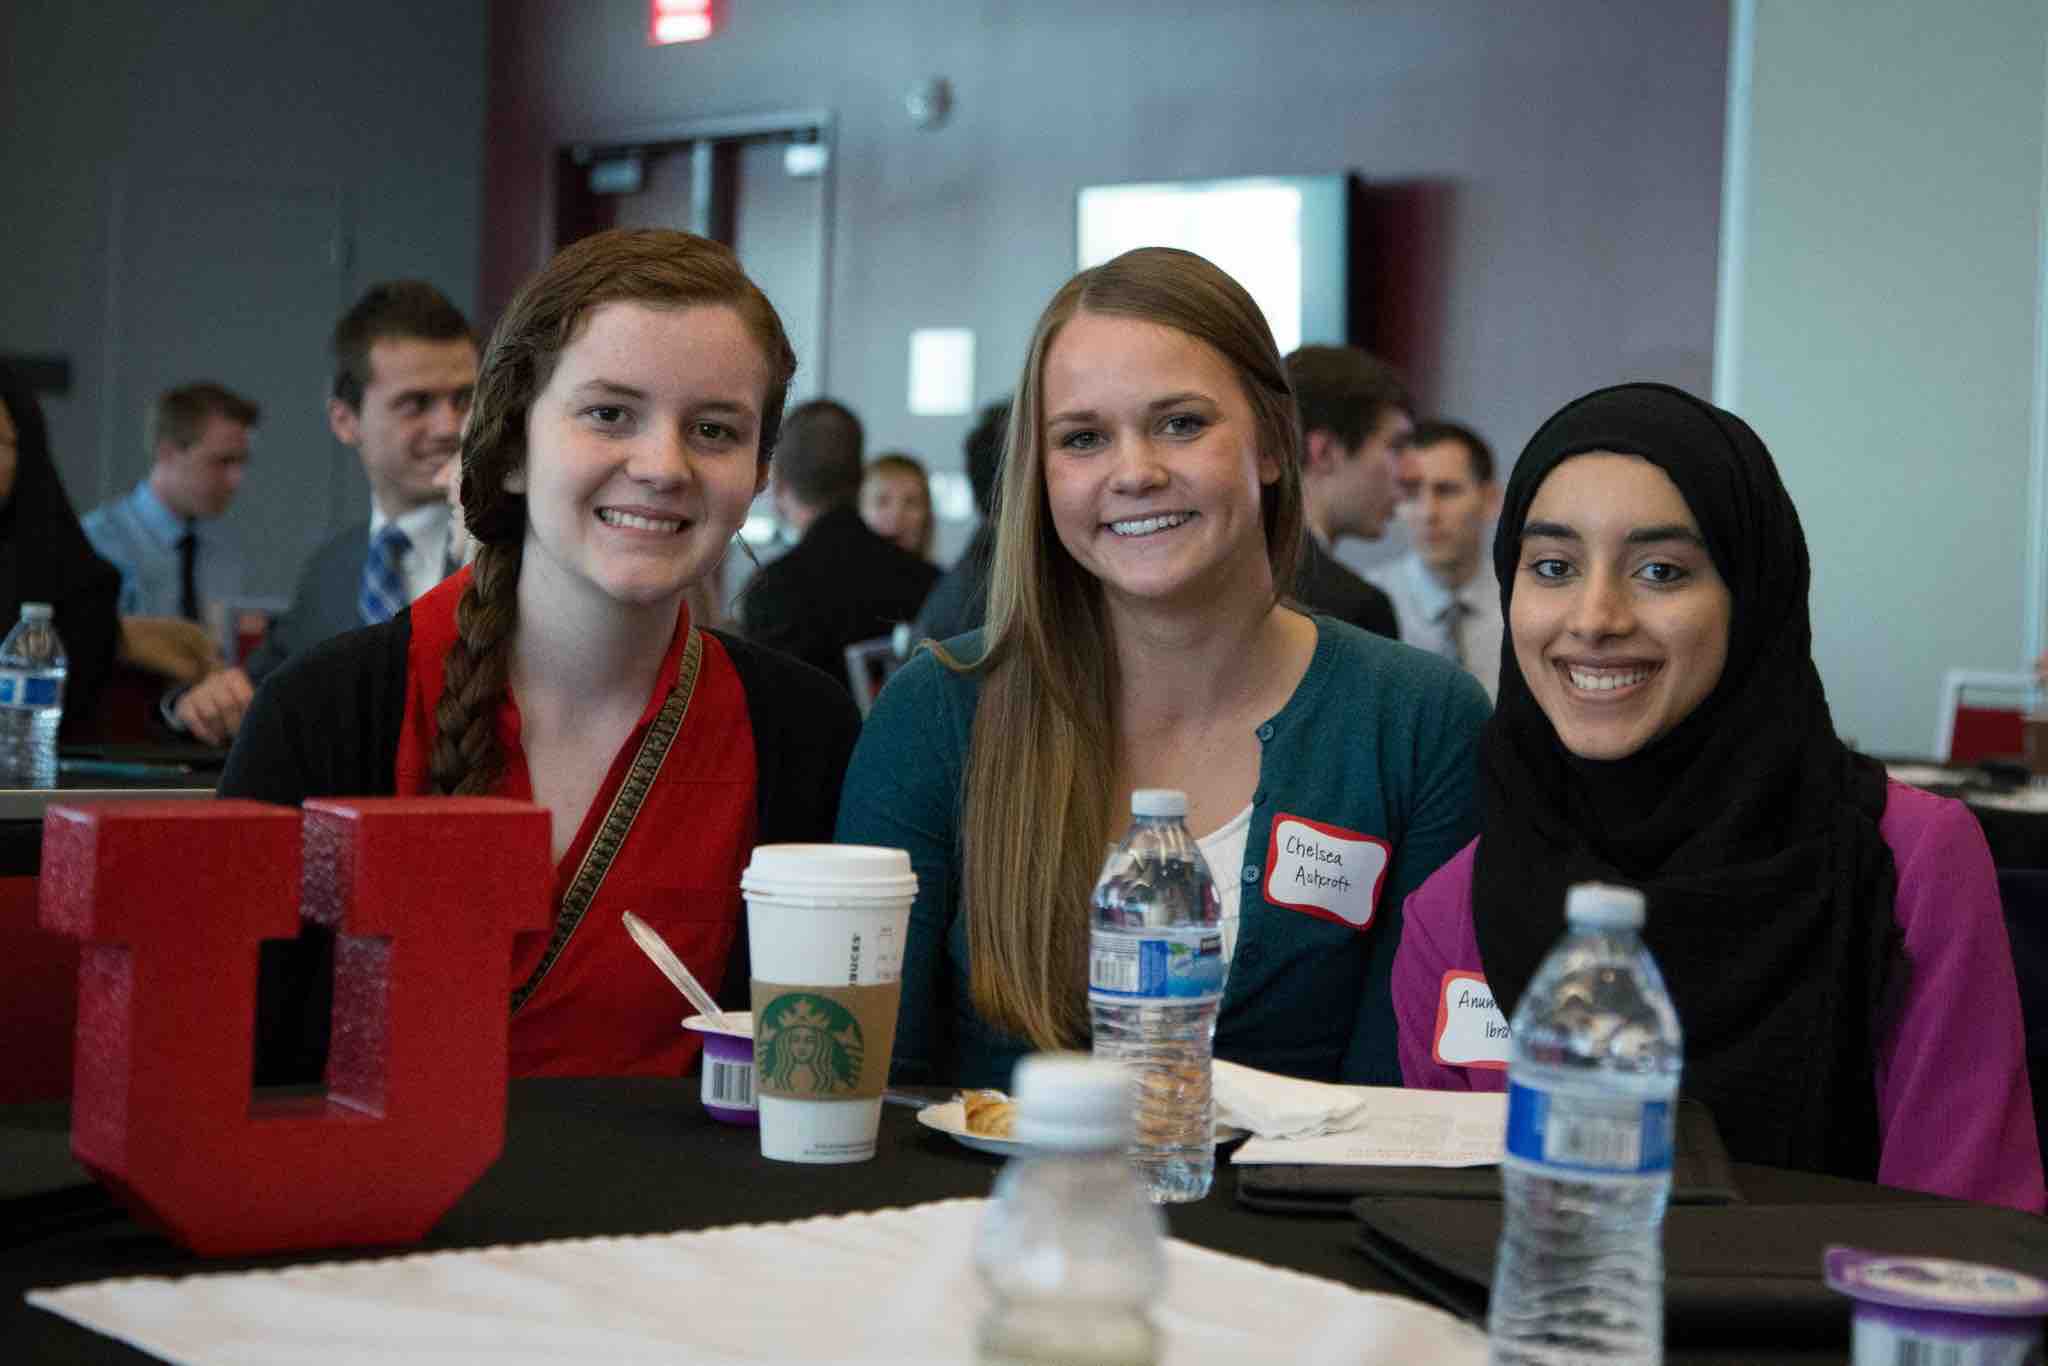 David Eccles School of Business students attend the Business Career Conference